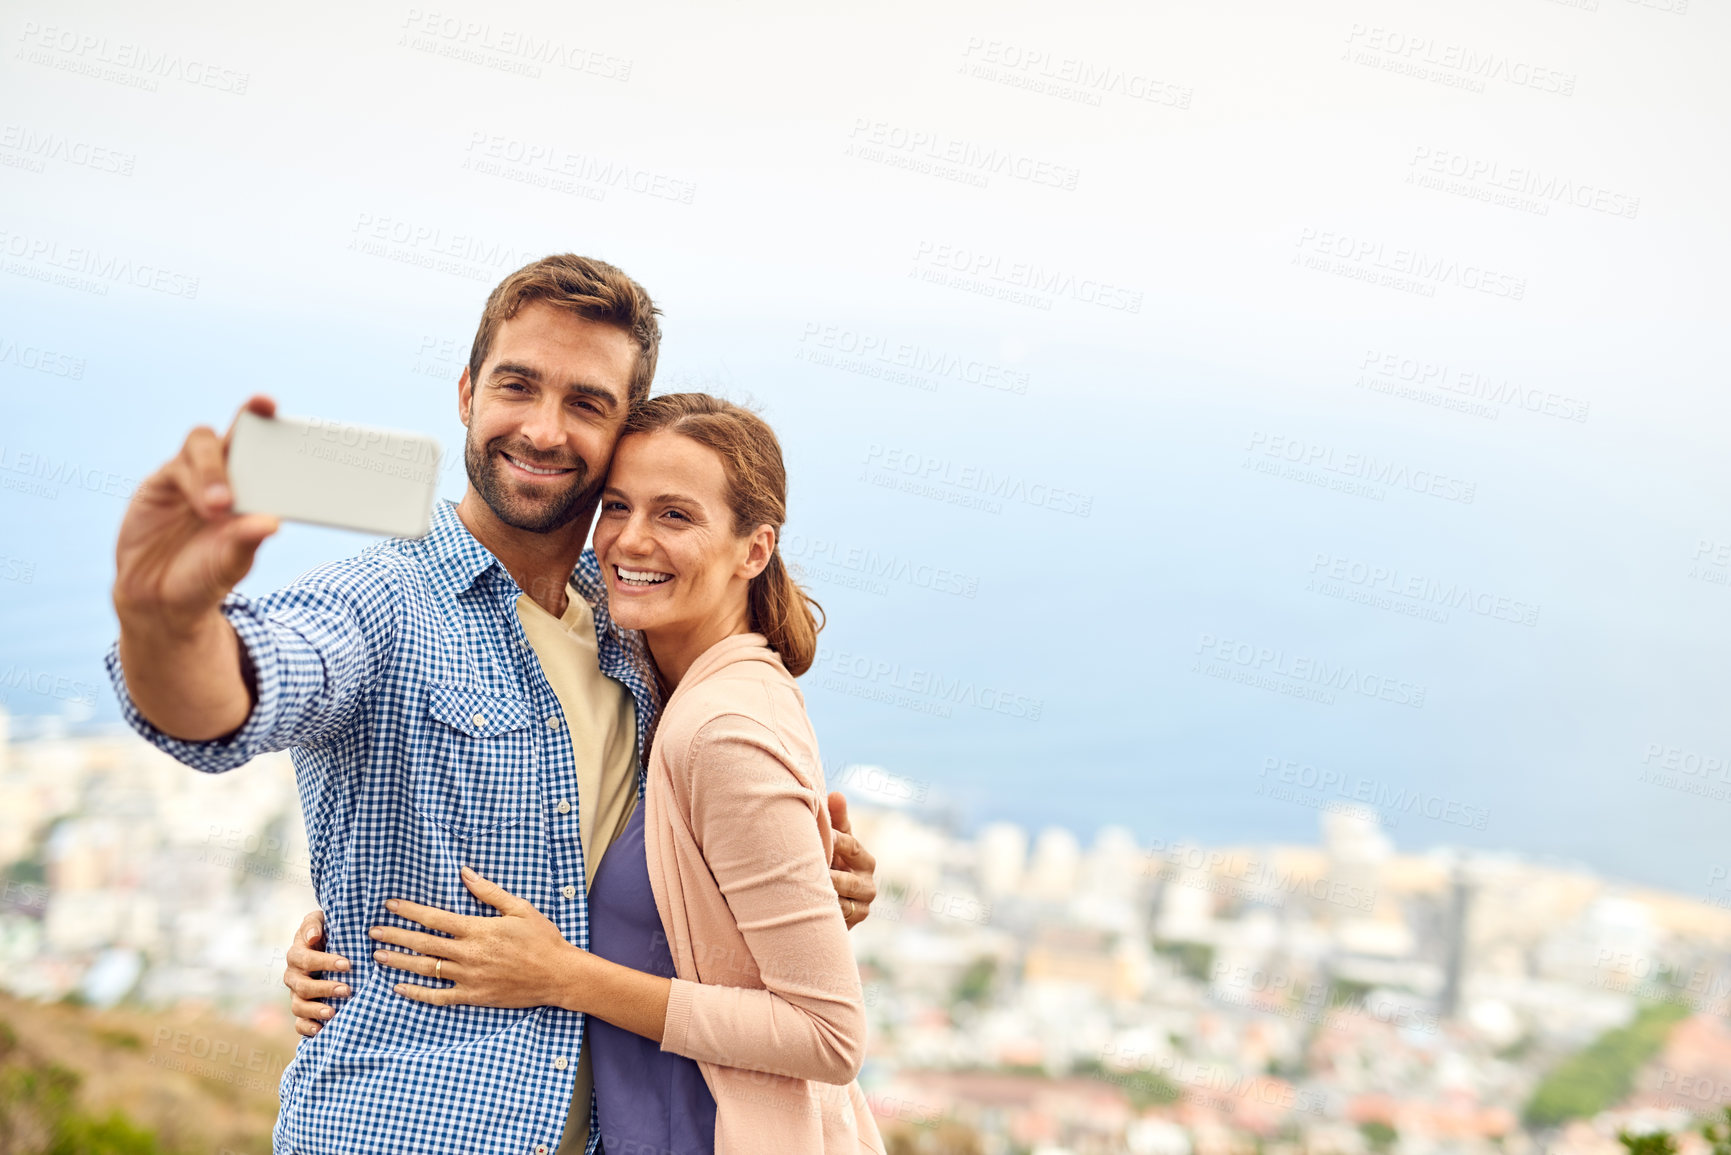 Buy stock photo Cropped shot of an affectionate couple taking selfies outside